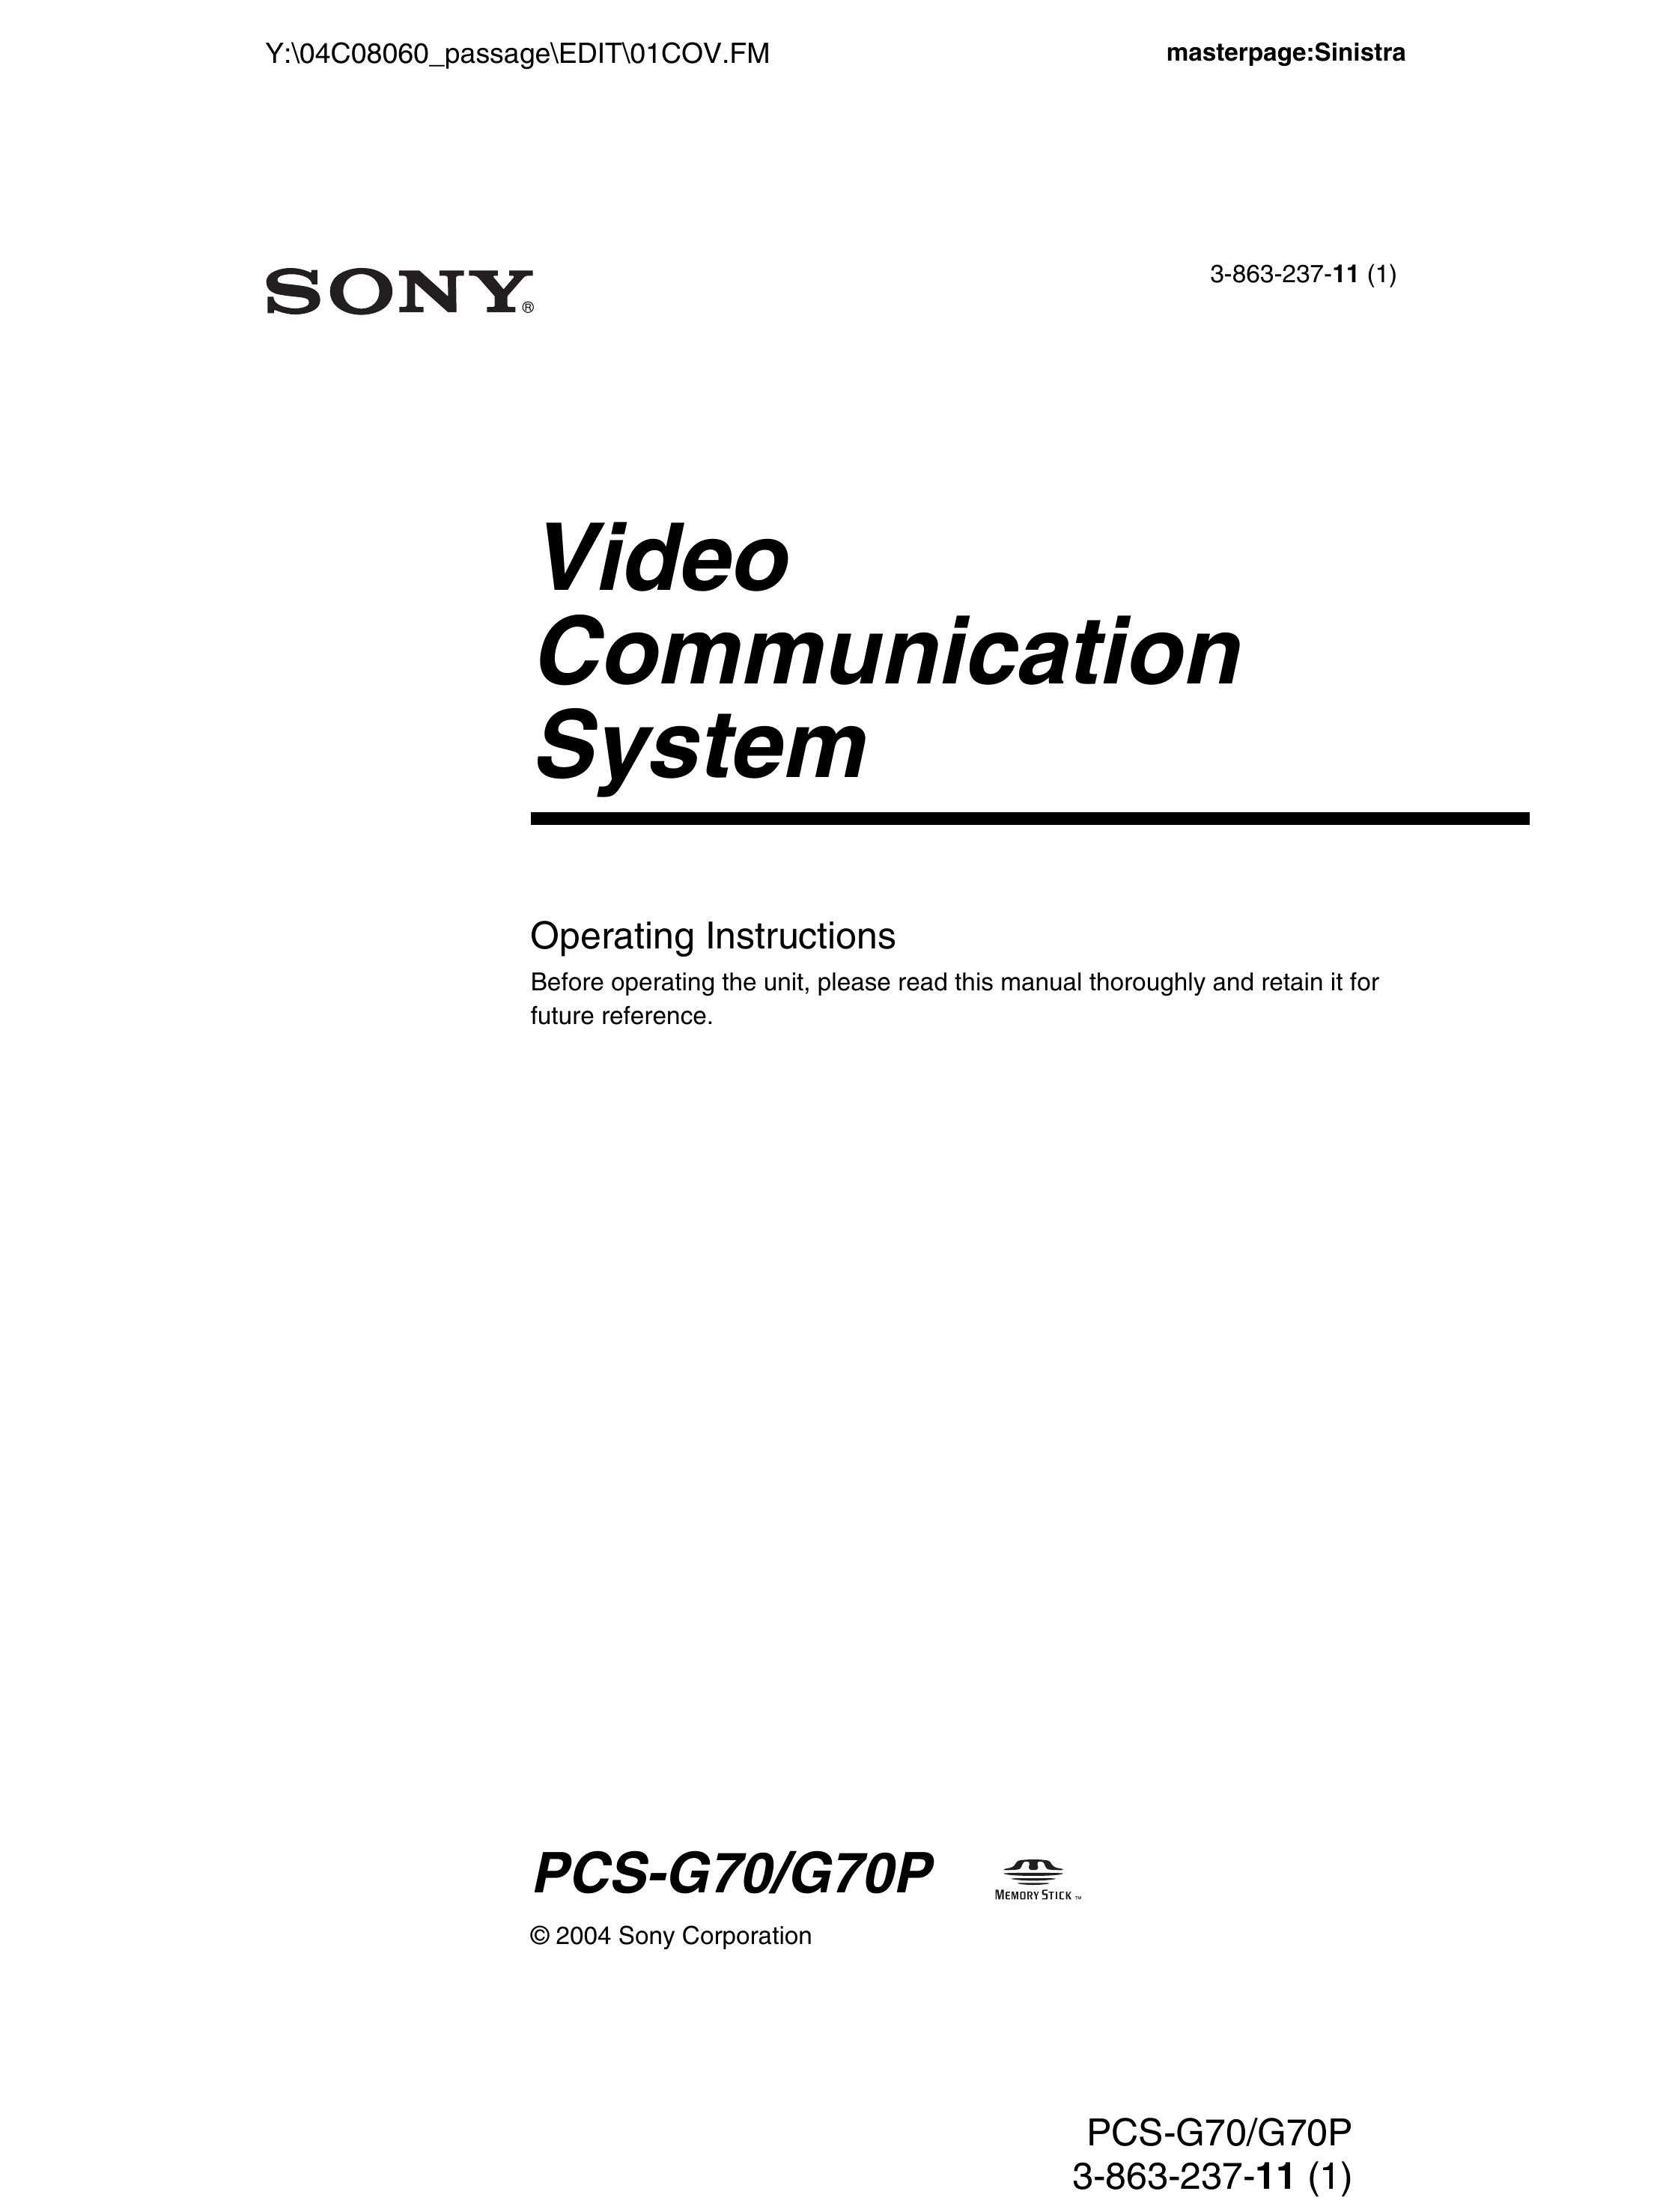 Sony PCS-G70 Trimmer User Manual